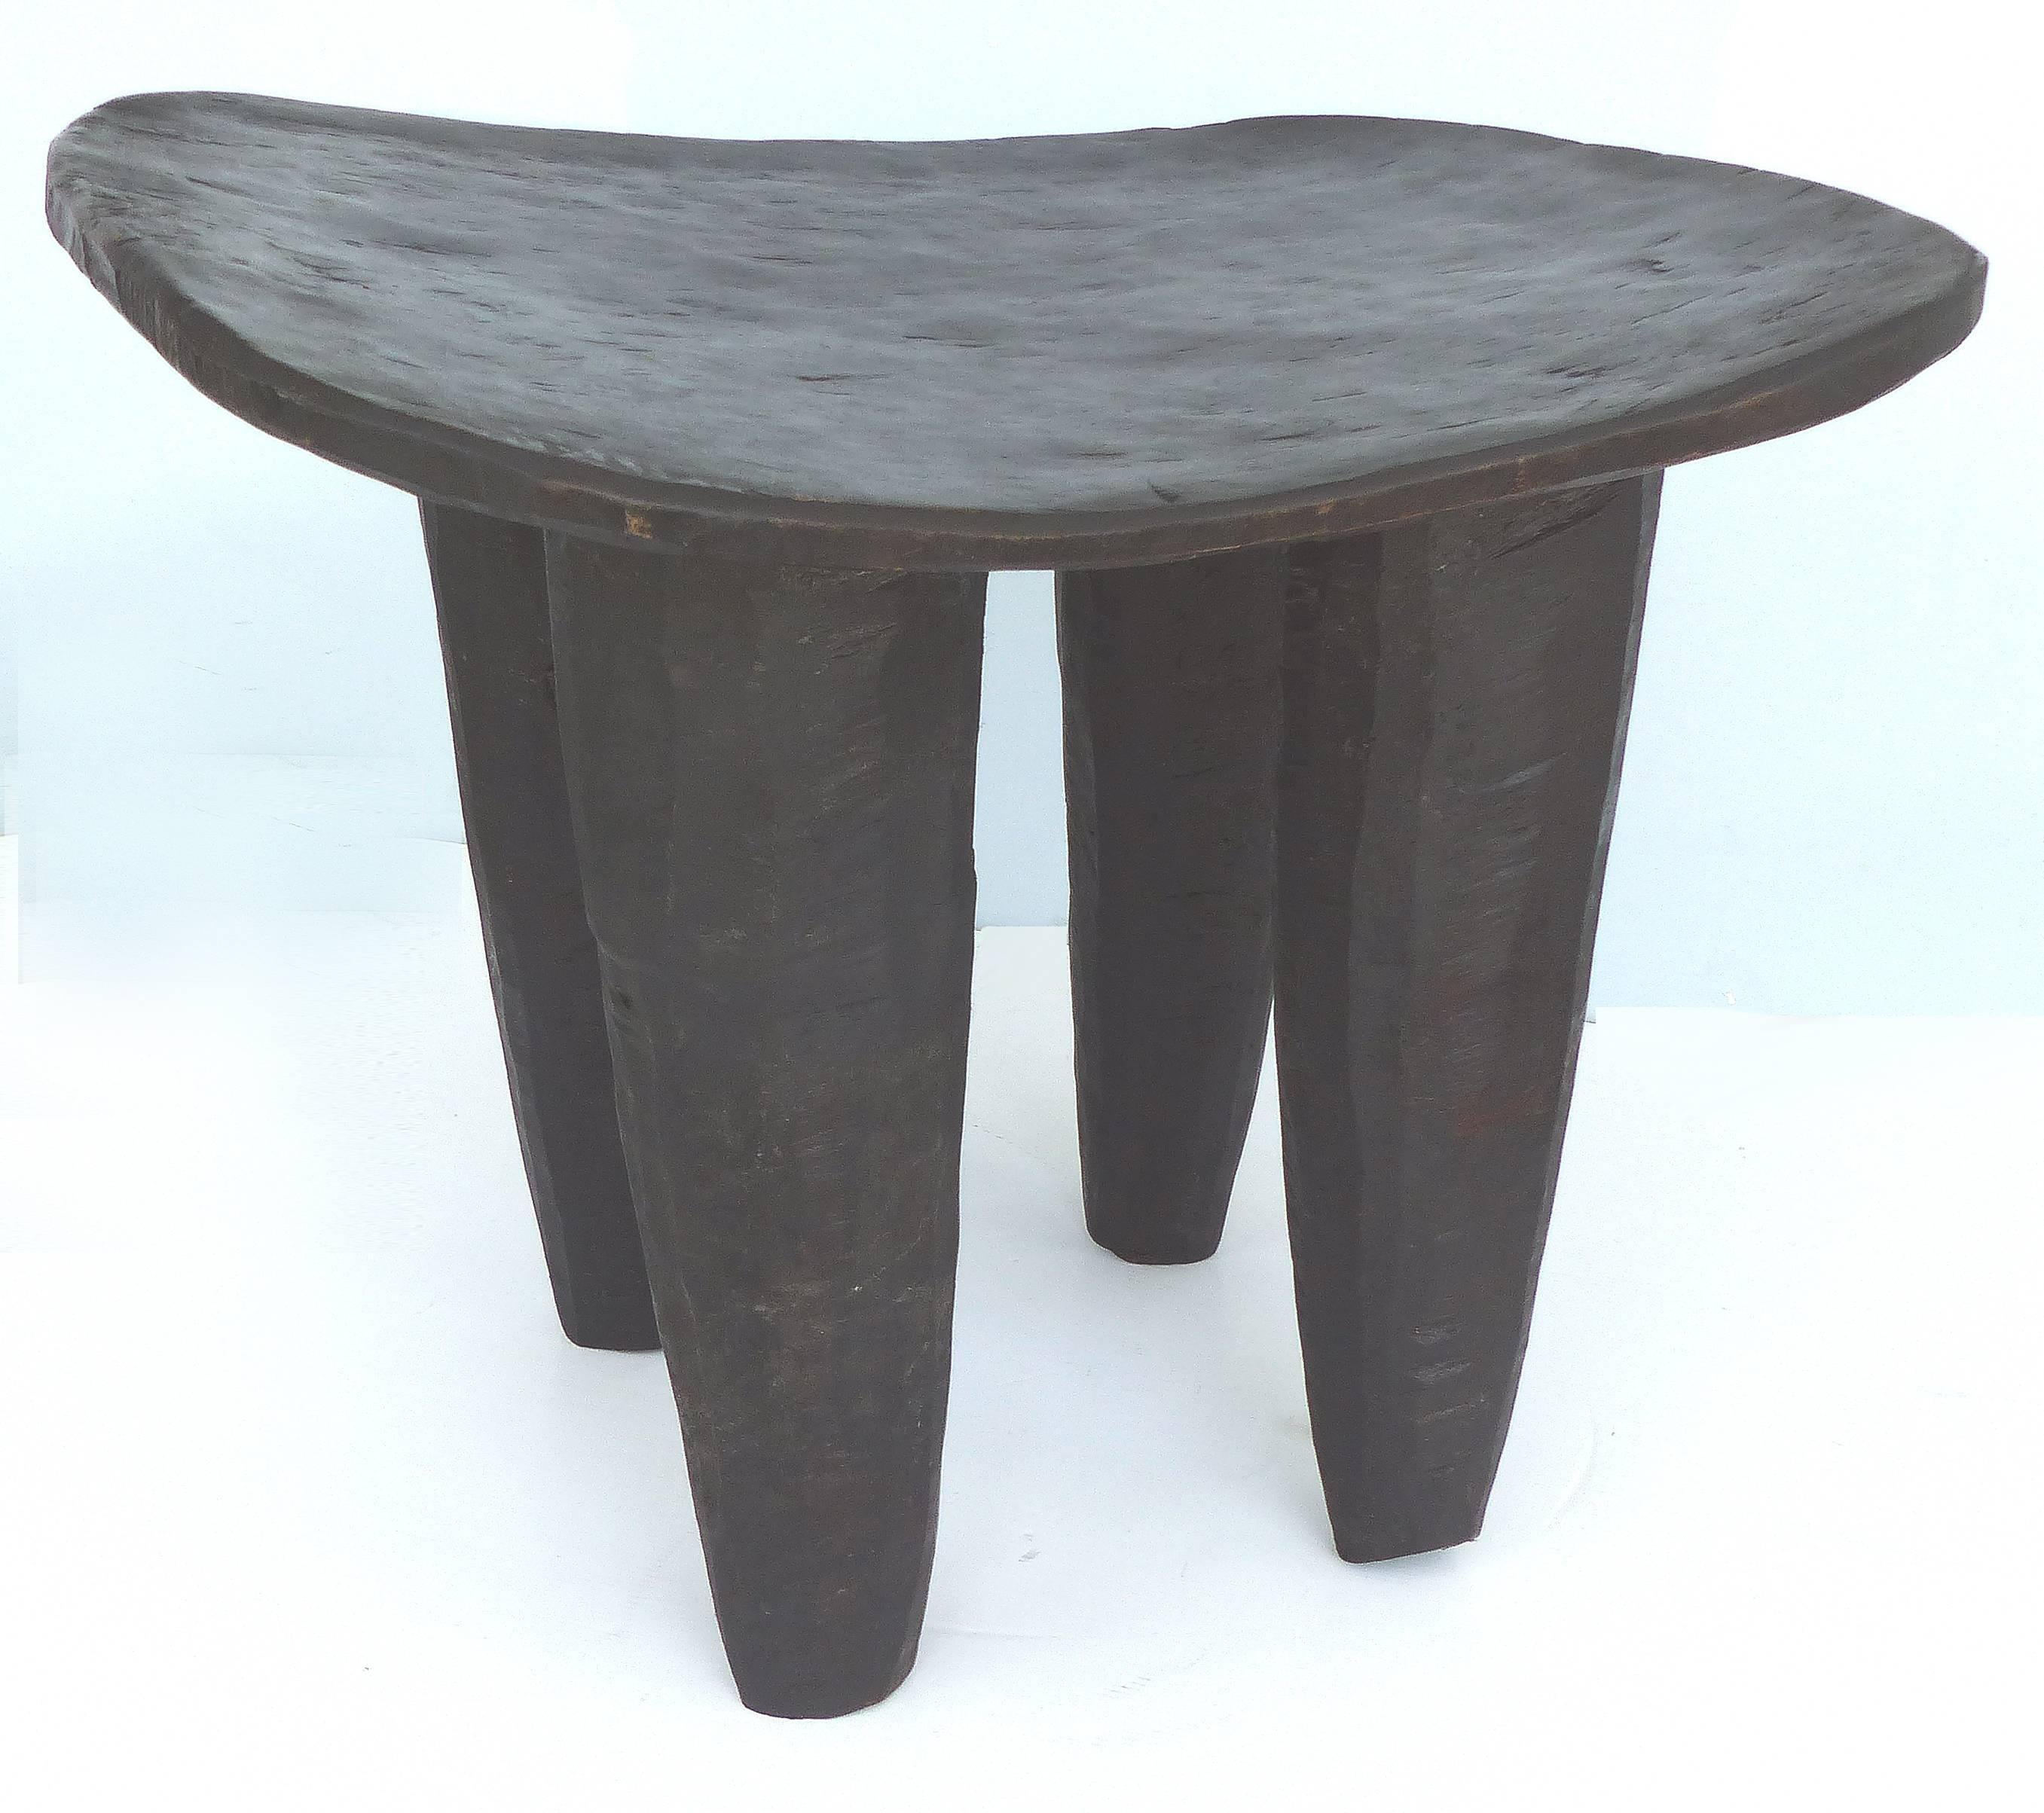 Tribal African Handcarved Senufo Stool from Cote d'Ivoire